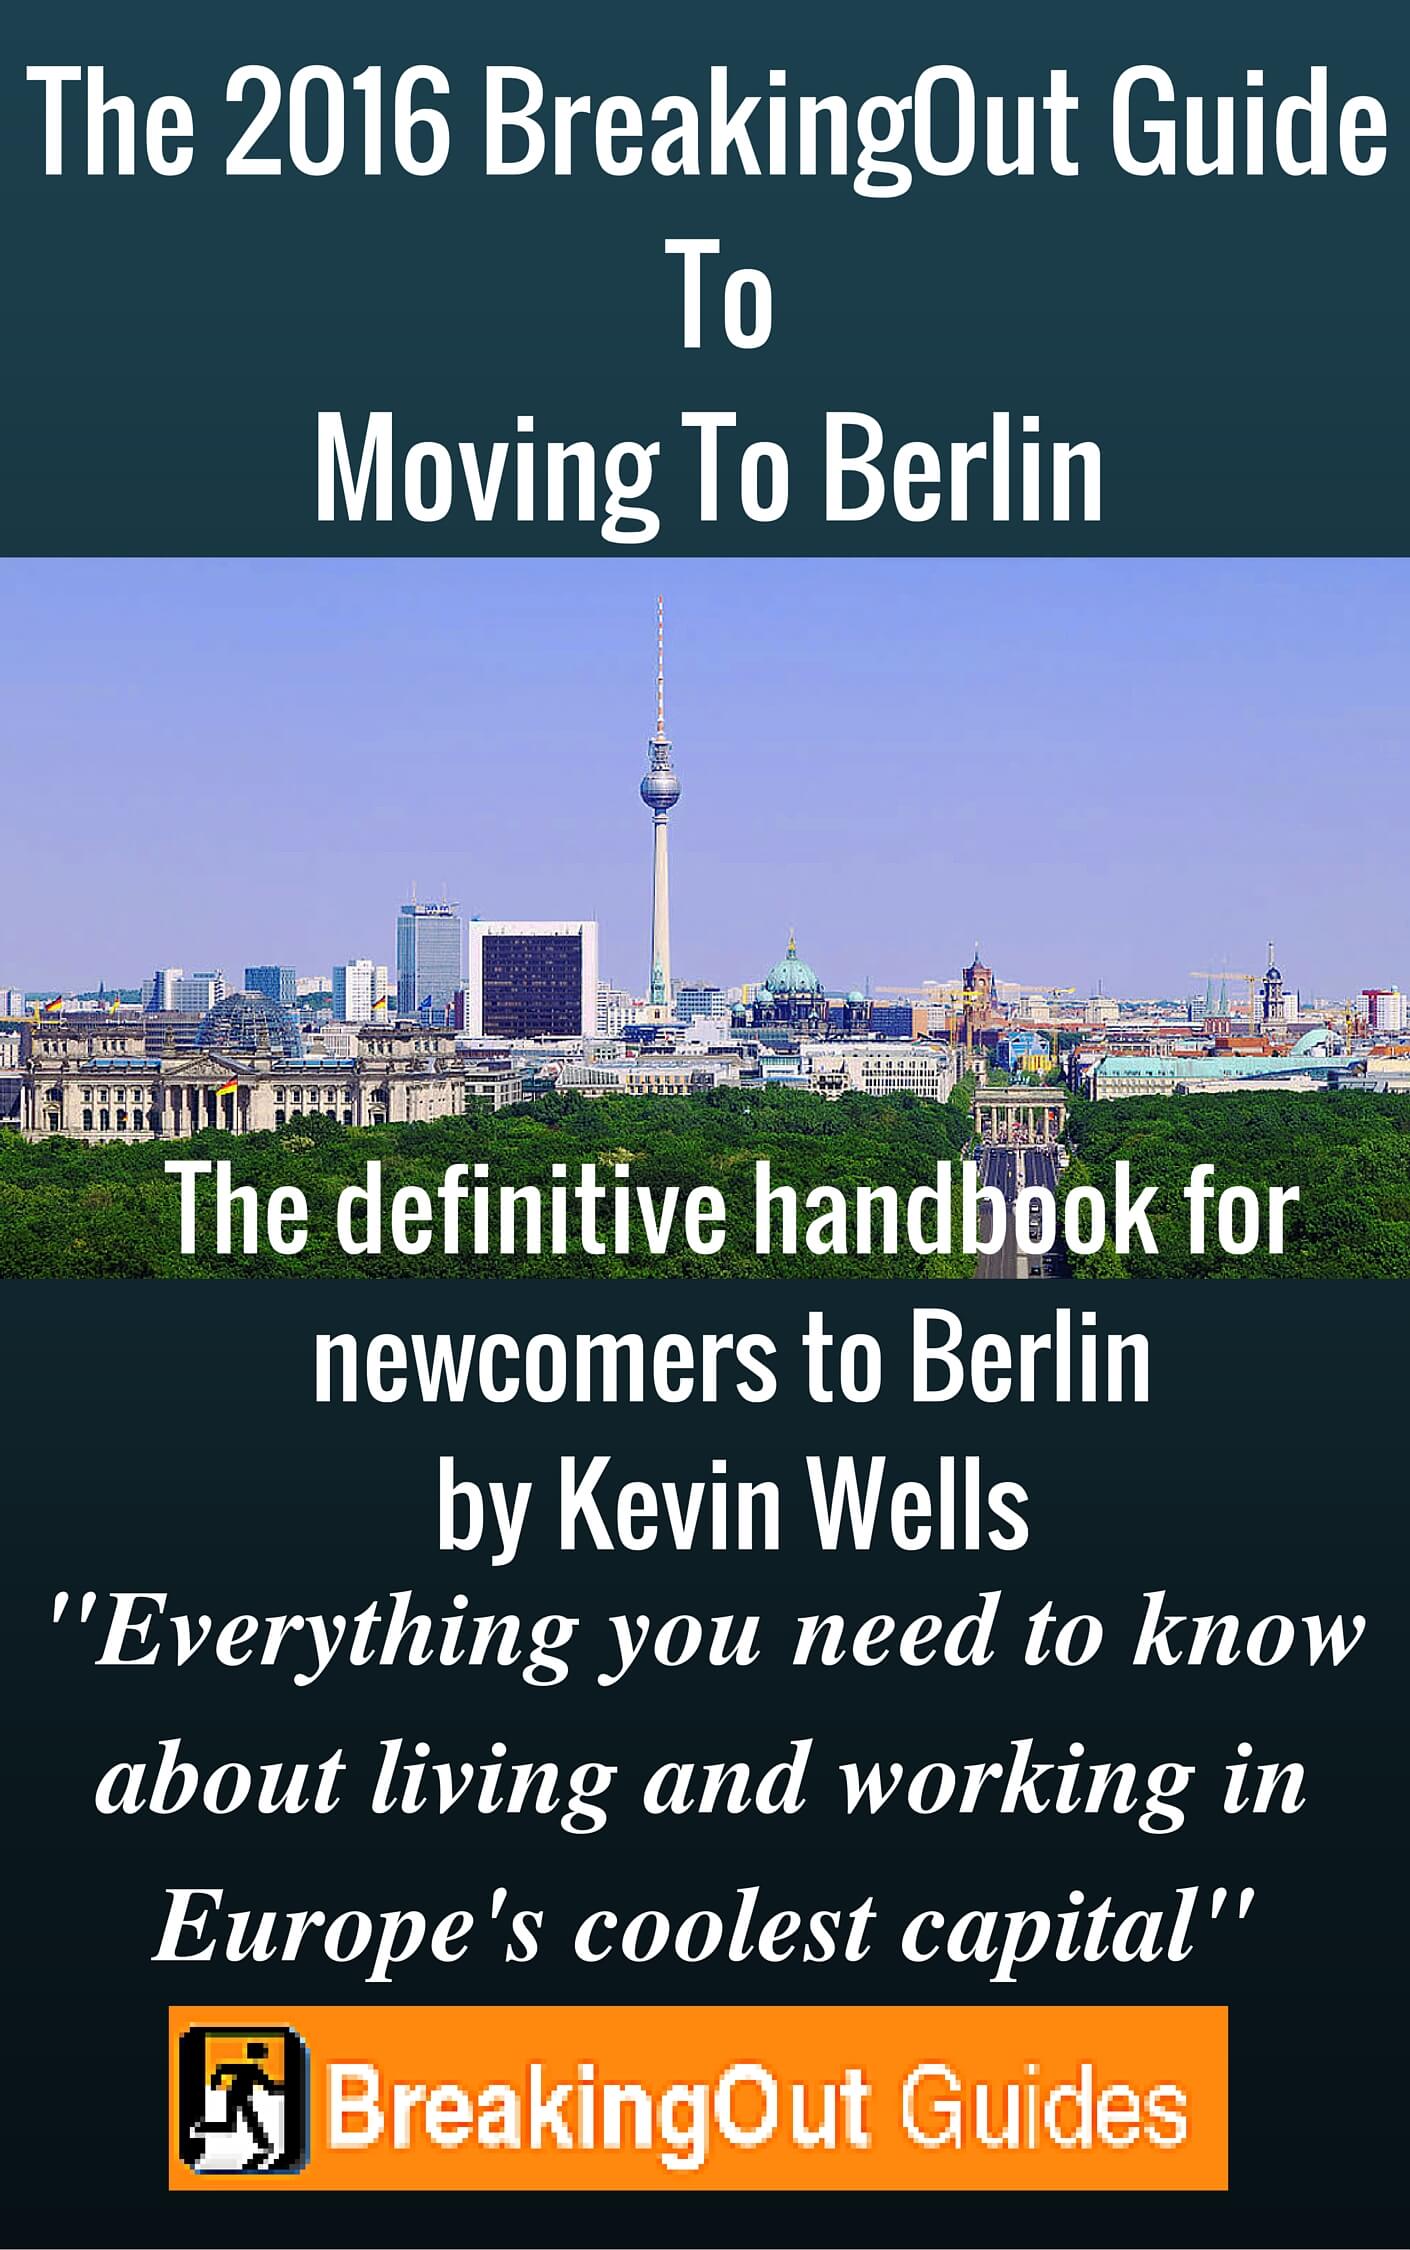 The 2016 BreakingOut Guide_Moving To Berlin